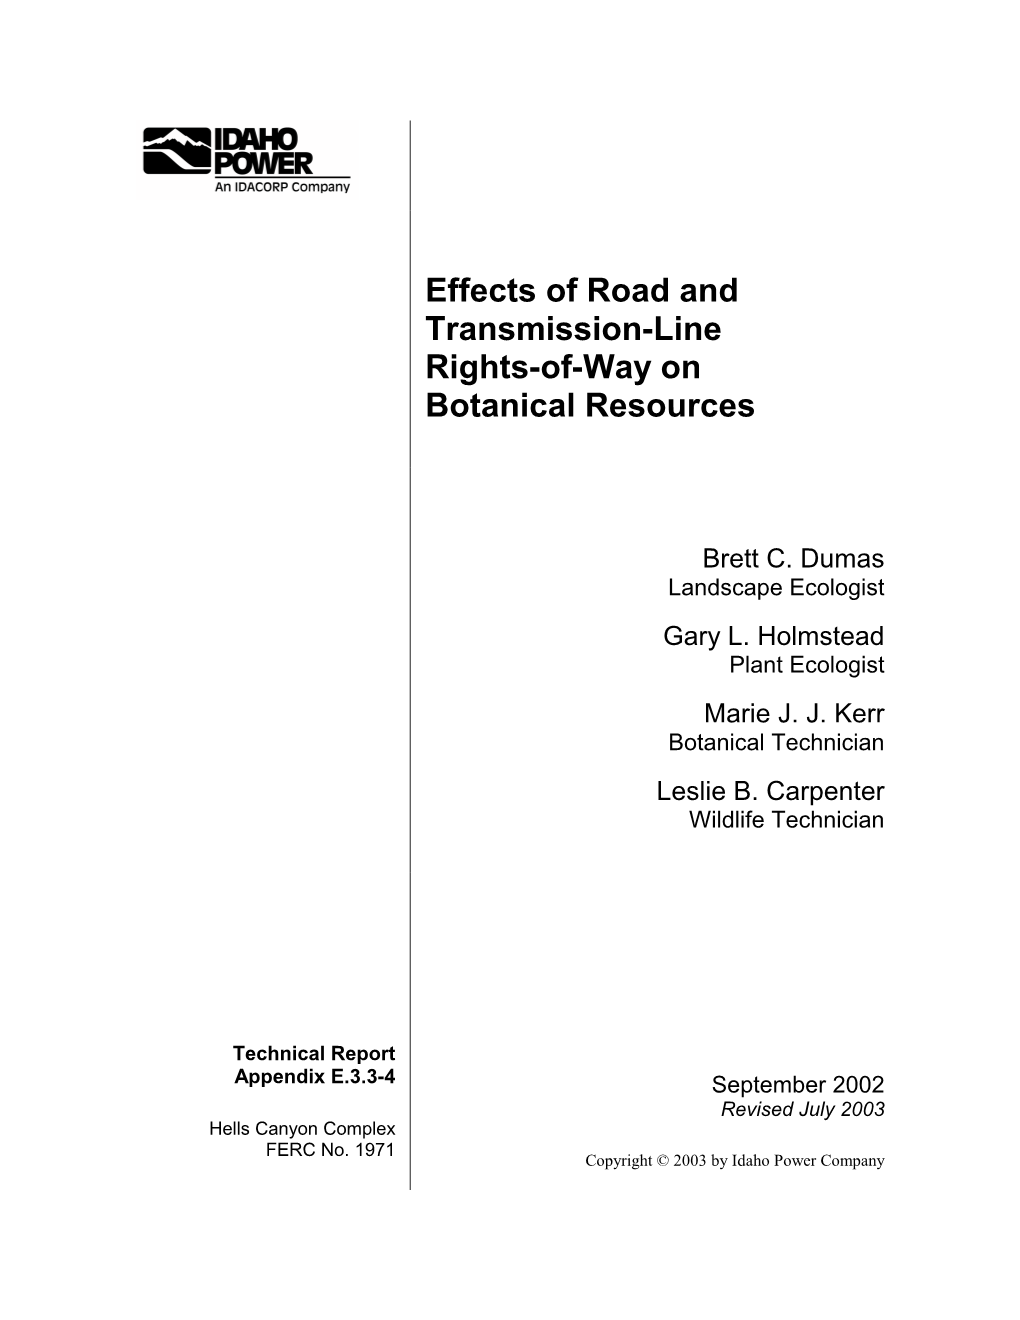 Effects of Road and Transmission Line Rights-Of-Way on Botanical